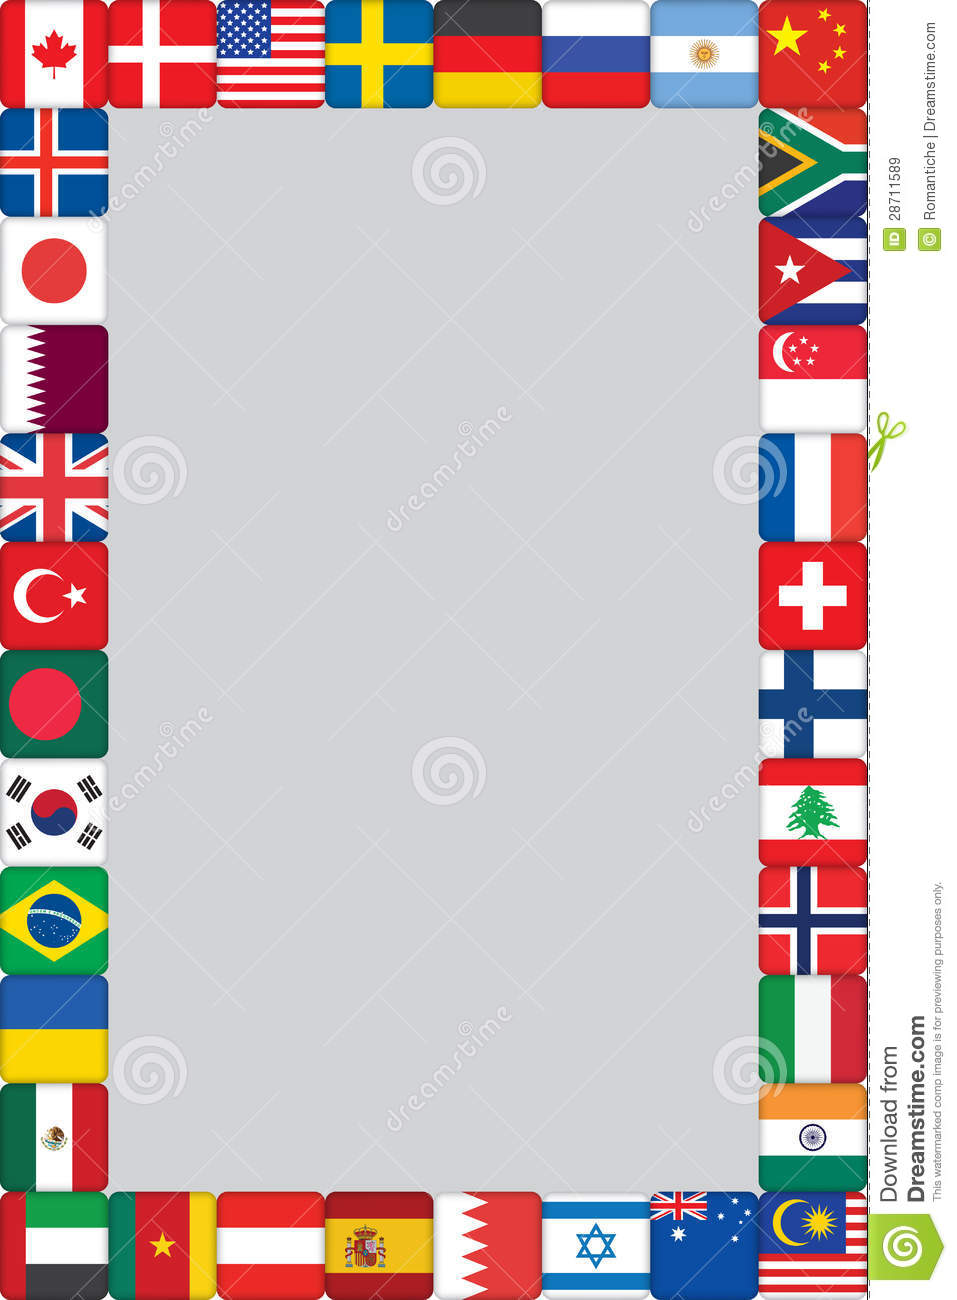 International flags clipart - Clipground